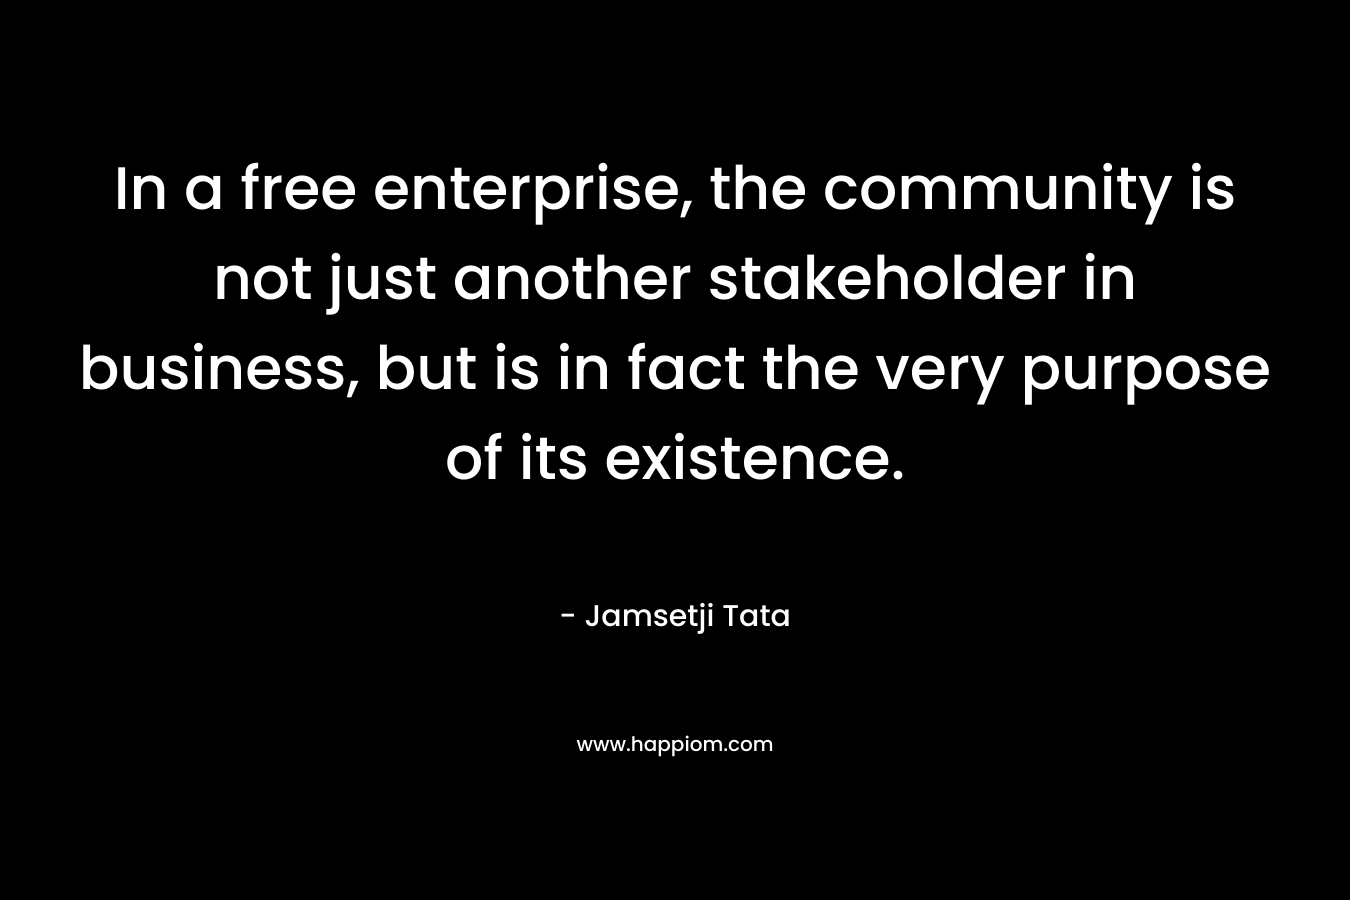 In a free enterprise, the community is not just another stakeholder in business, but is in fact the very purpose of its existence.